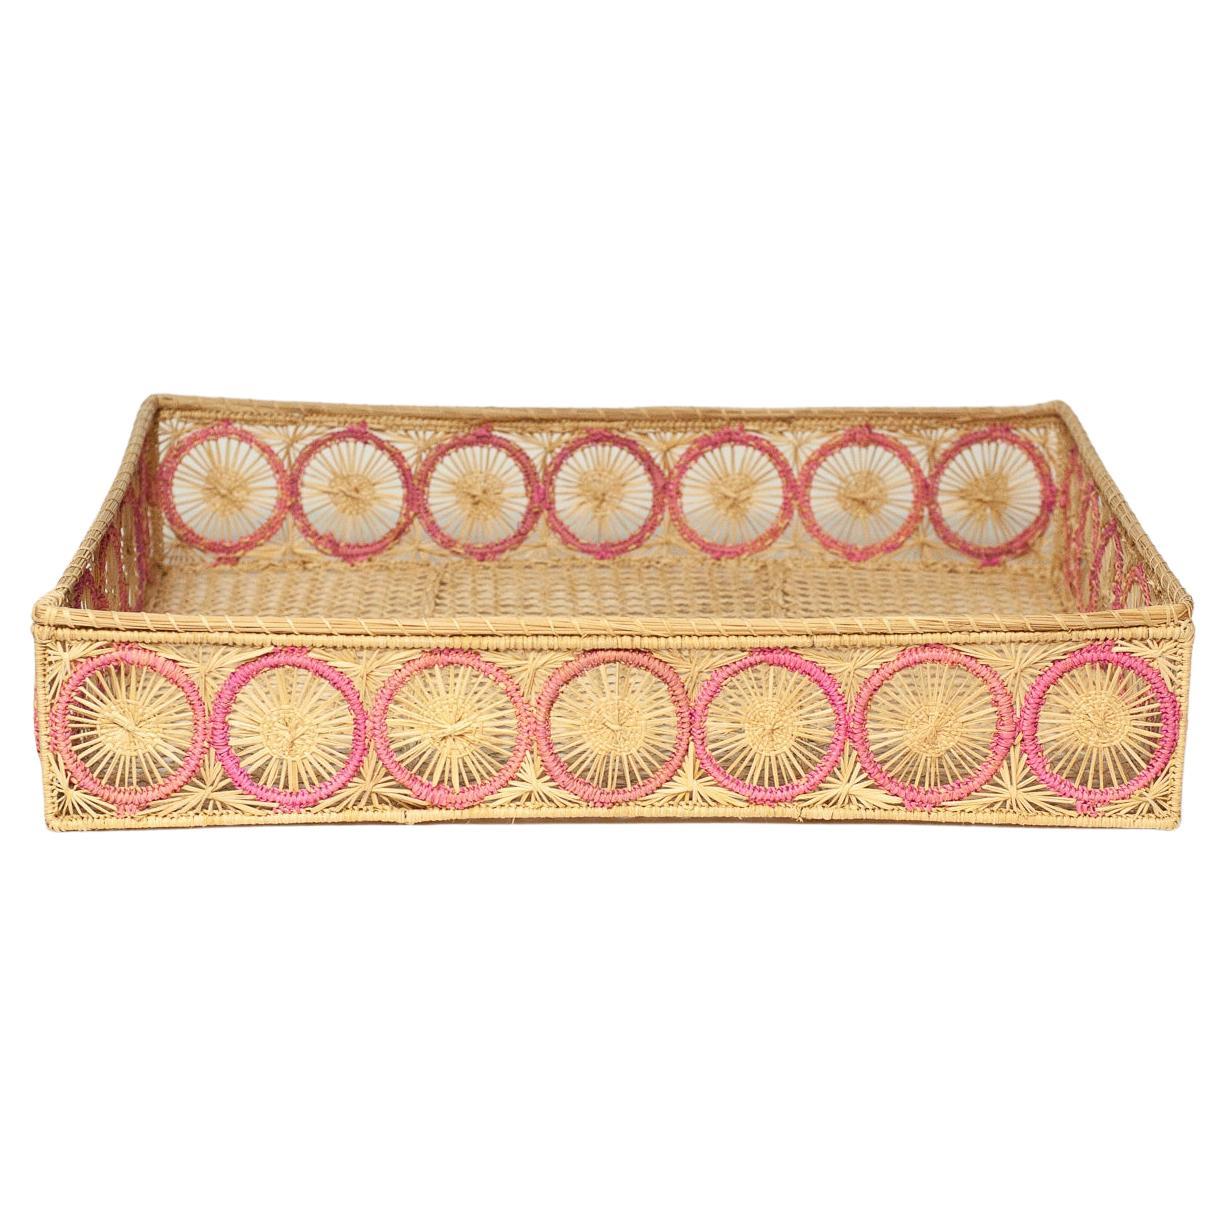 Contemporary Handwoven Natural and Pink Rattan Serving Tray / Basket For Sale